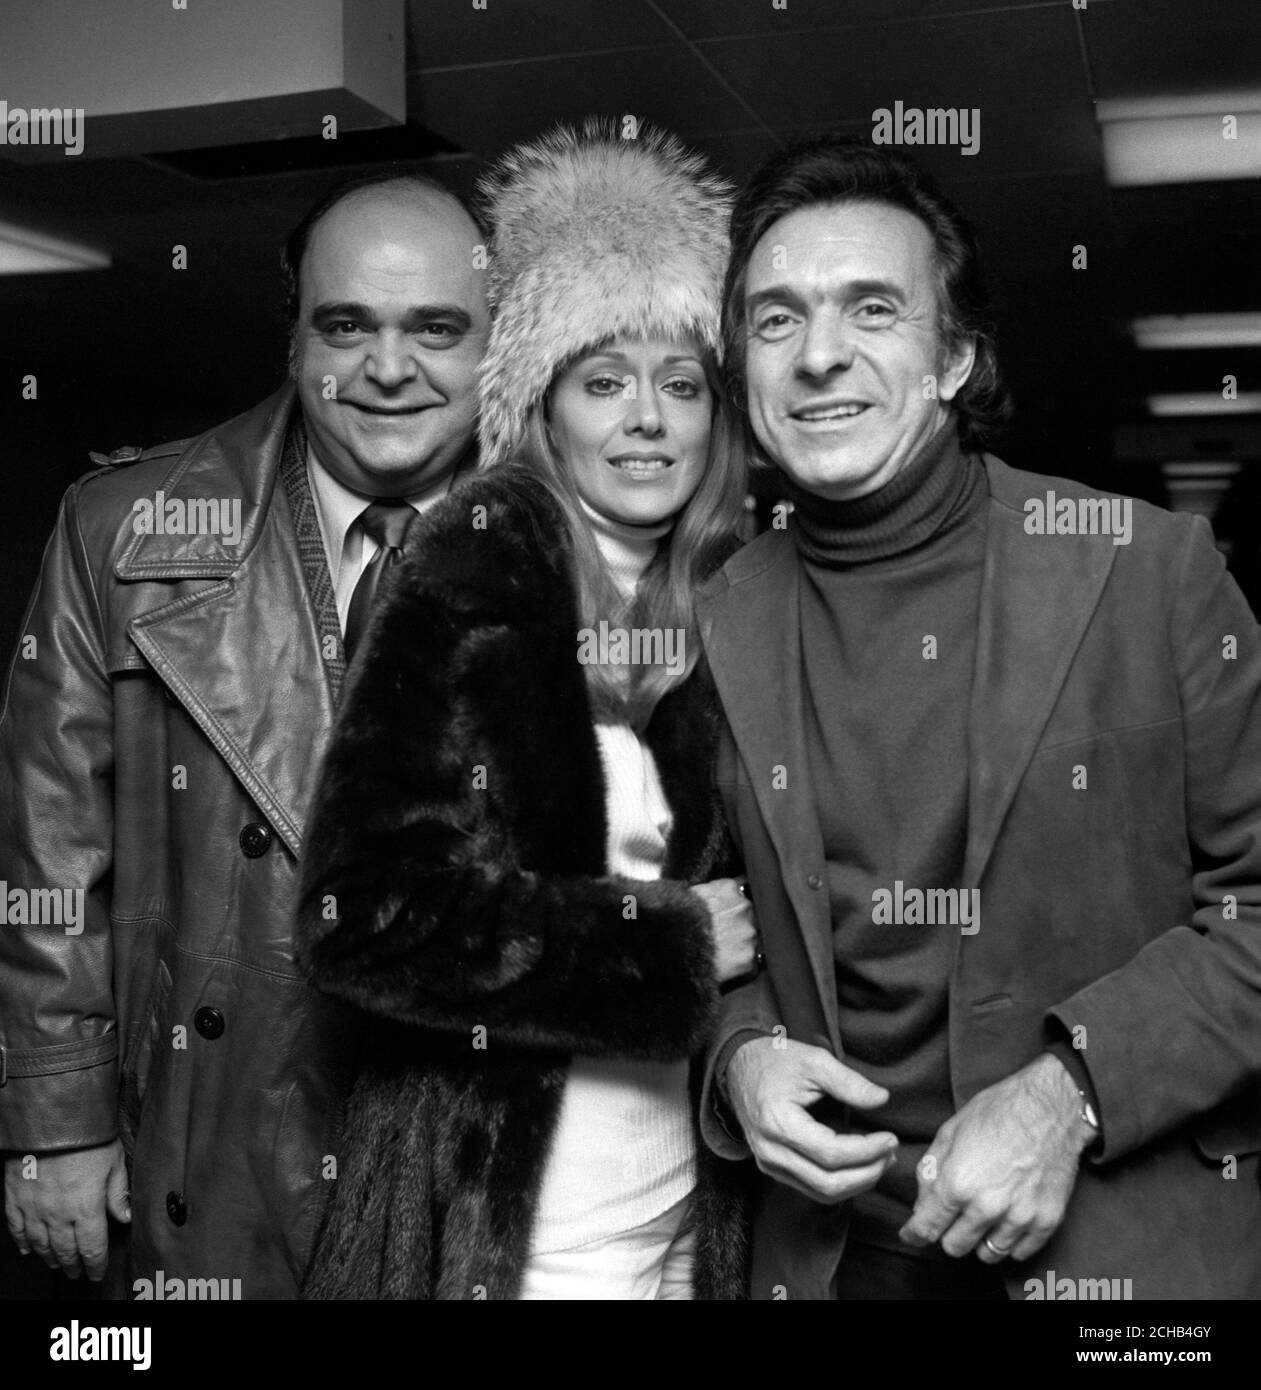 The three people who helped to make the film 'Man of La Mancha' are seen on their arrival at Heathrow Airport. (L-R) James Coco, who plays Sancho Panza, Julie Gregg, who plays Antonia Quijana, and the film's director Arthur Hiller. Stock Photo